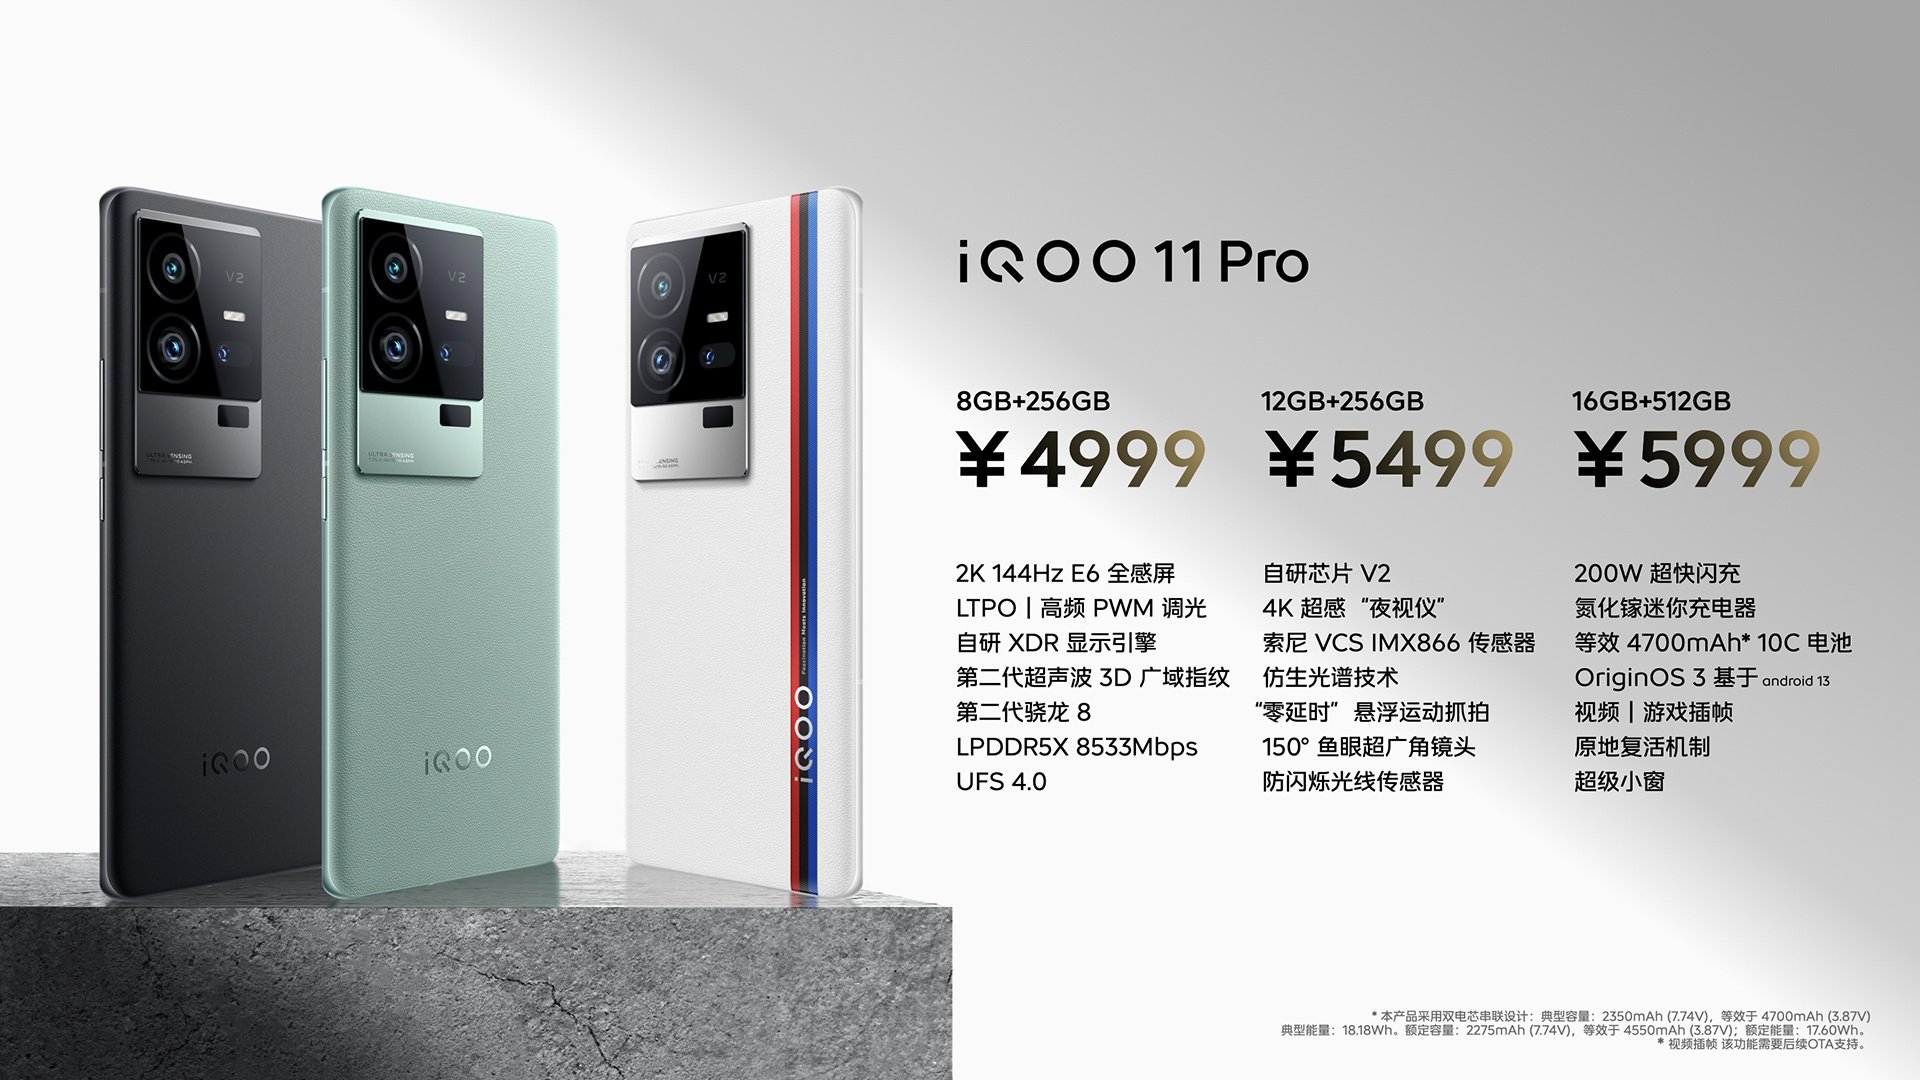 iQOO 11, iQOO 11 Pro 5G Launched With Snapdragon 8 Gen 2 Chipset; Check Price And Specifications Here